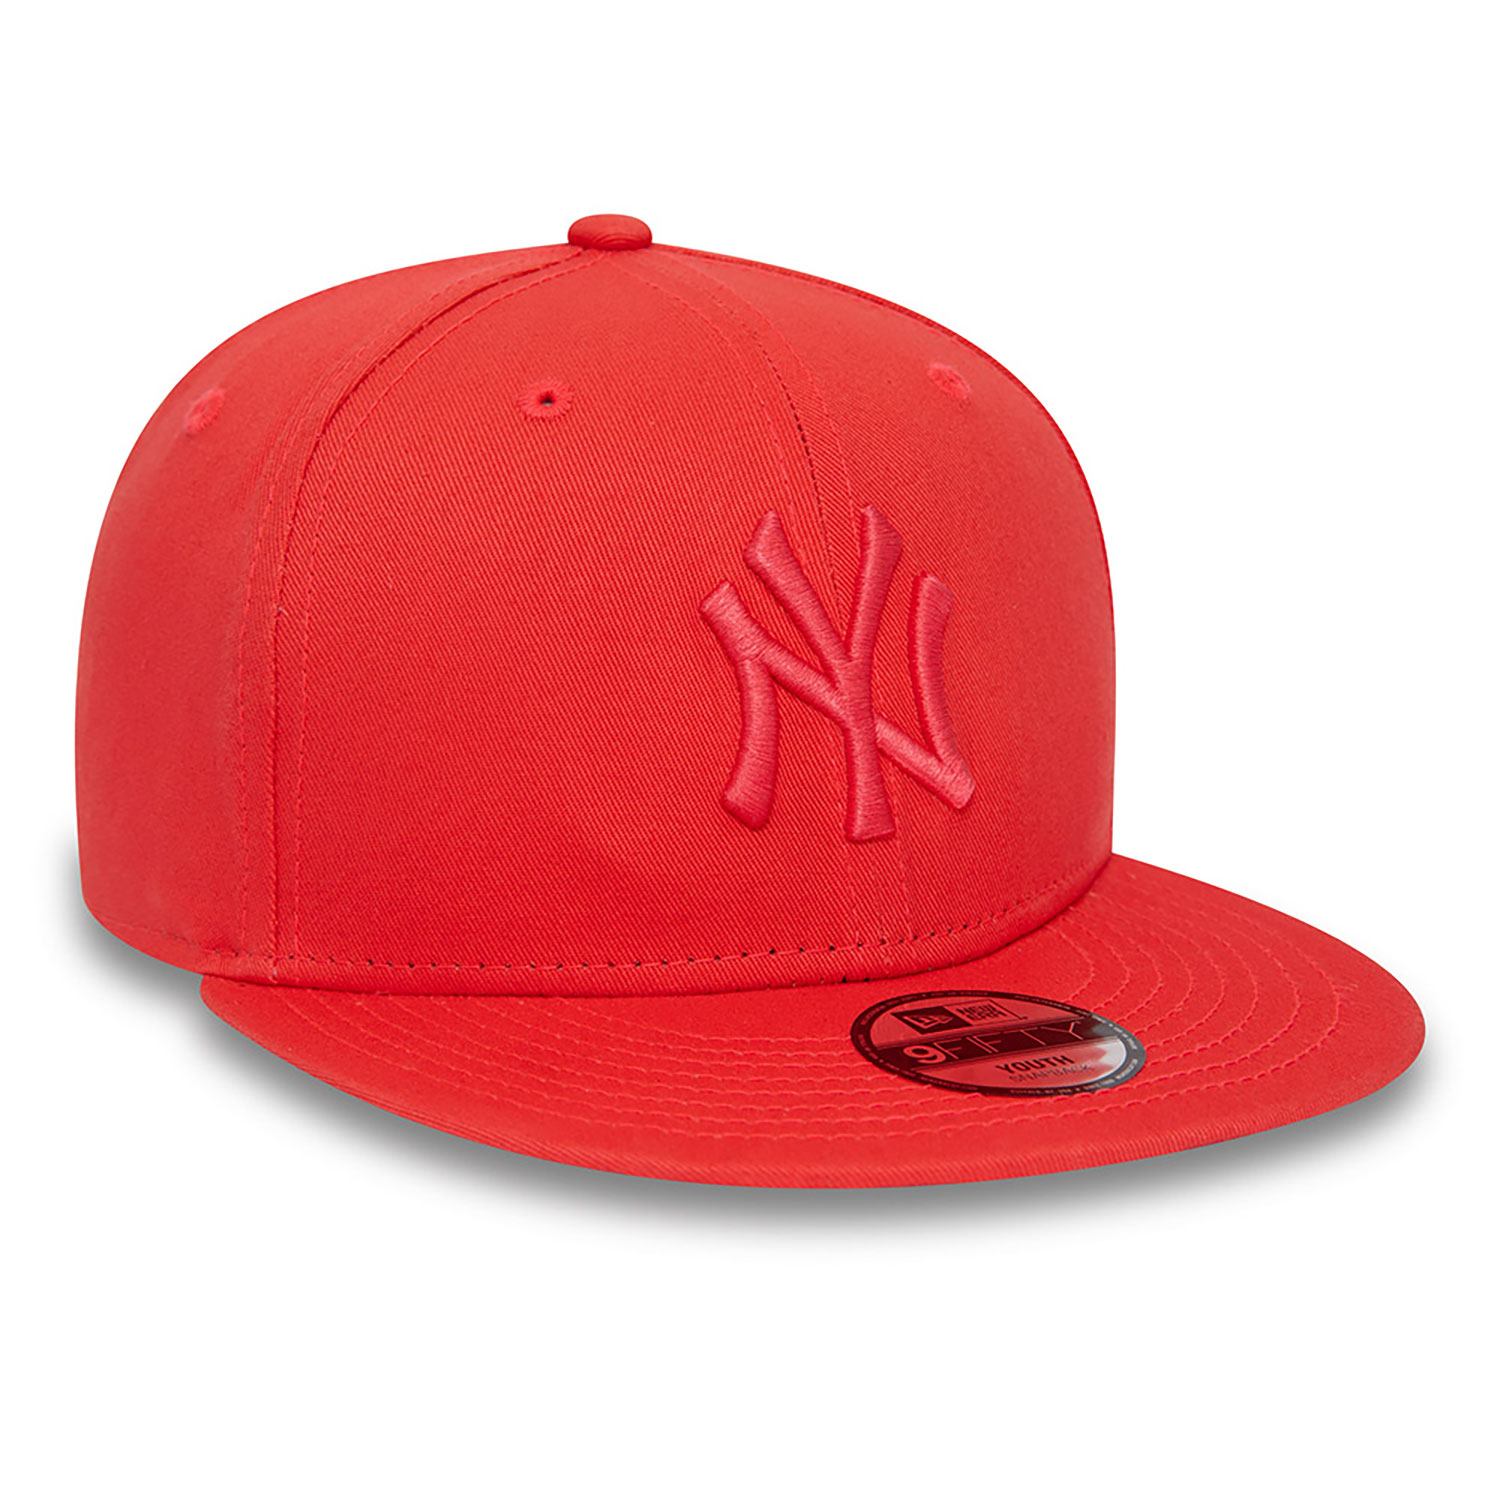 New York Yankees Youth League Essential Red 9FIFTY Adjustable Cap